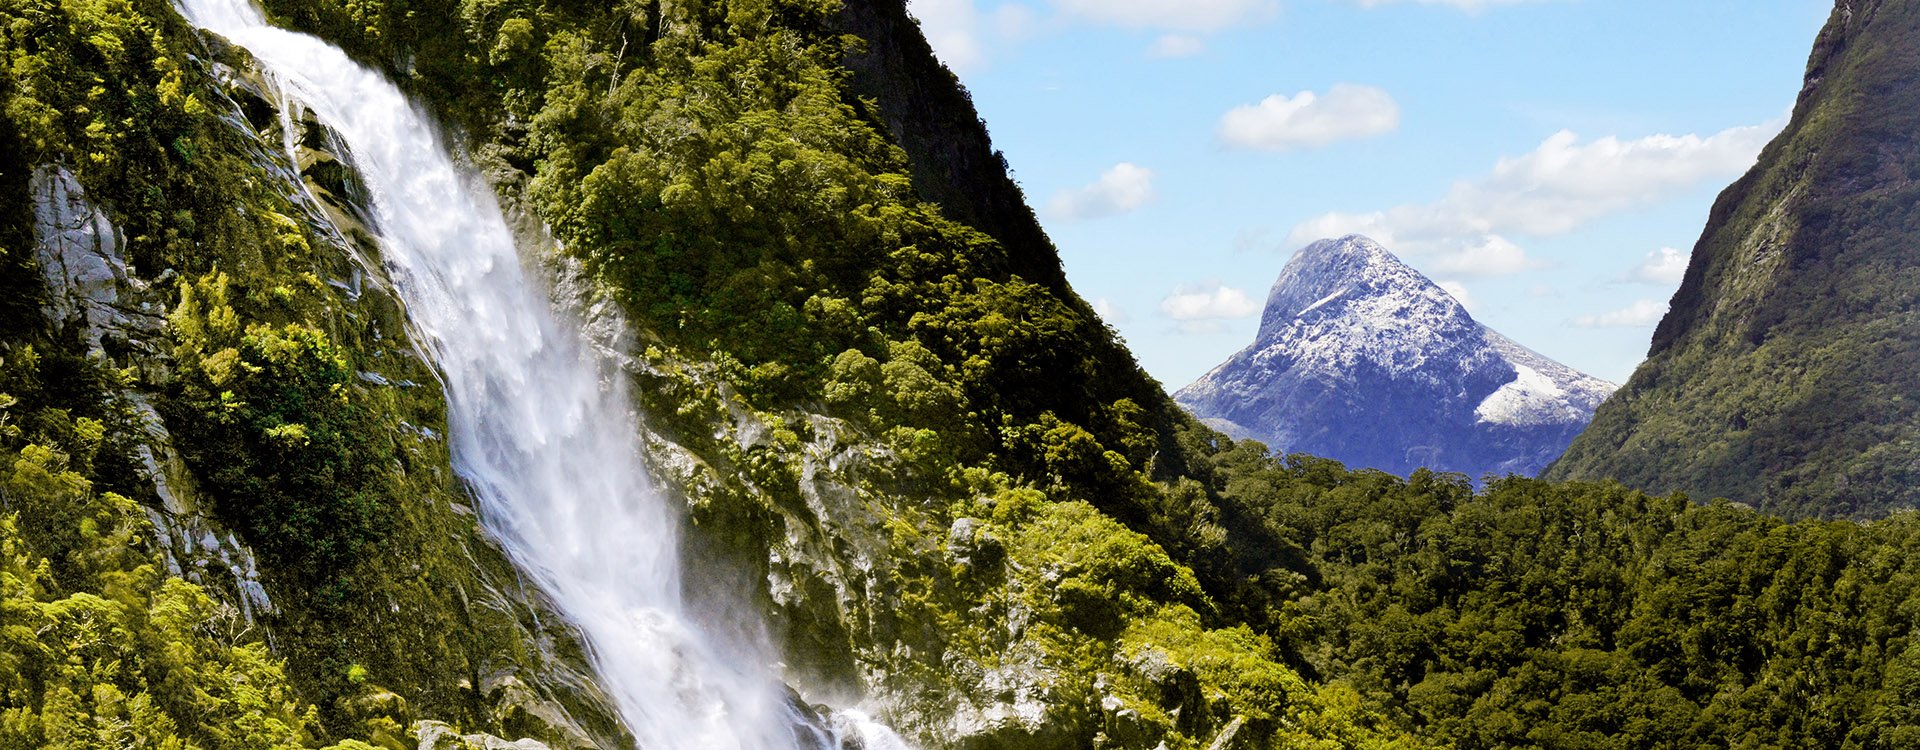 Spectacular waterfall in Milford Sound Fiordland National Park, New Zealand